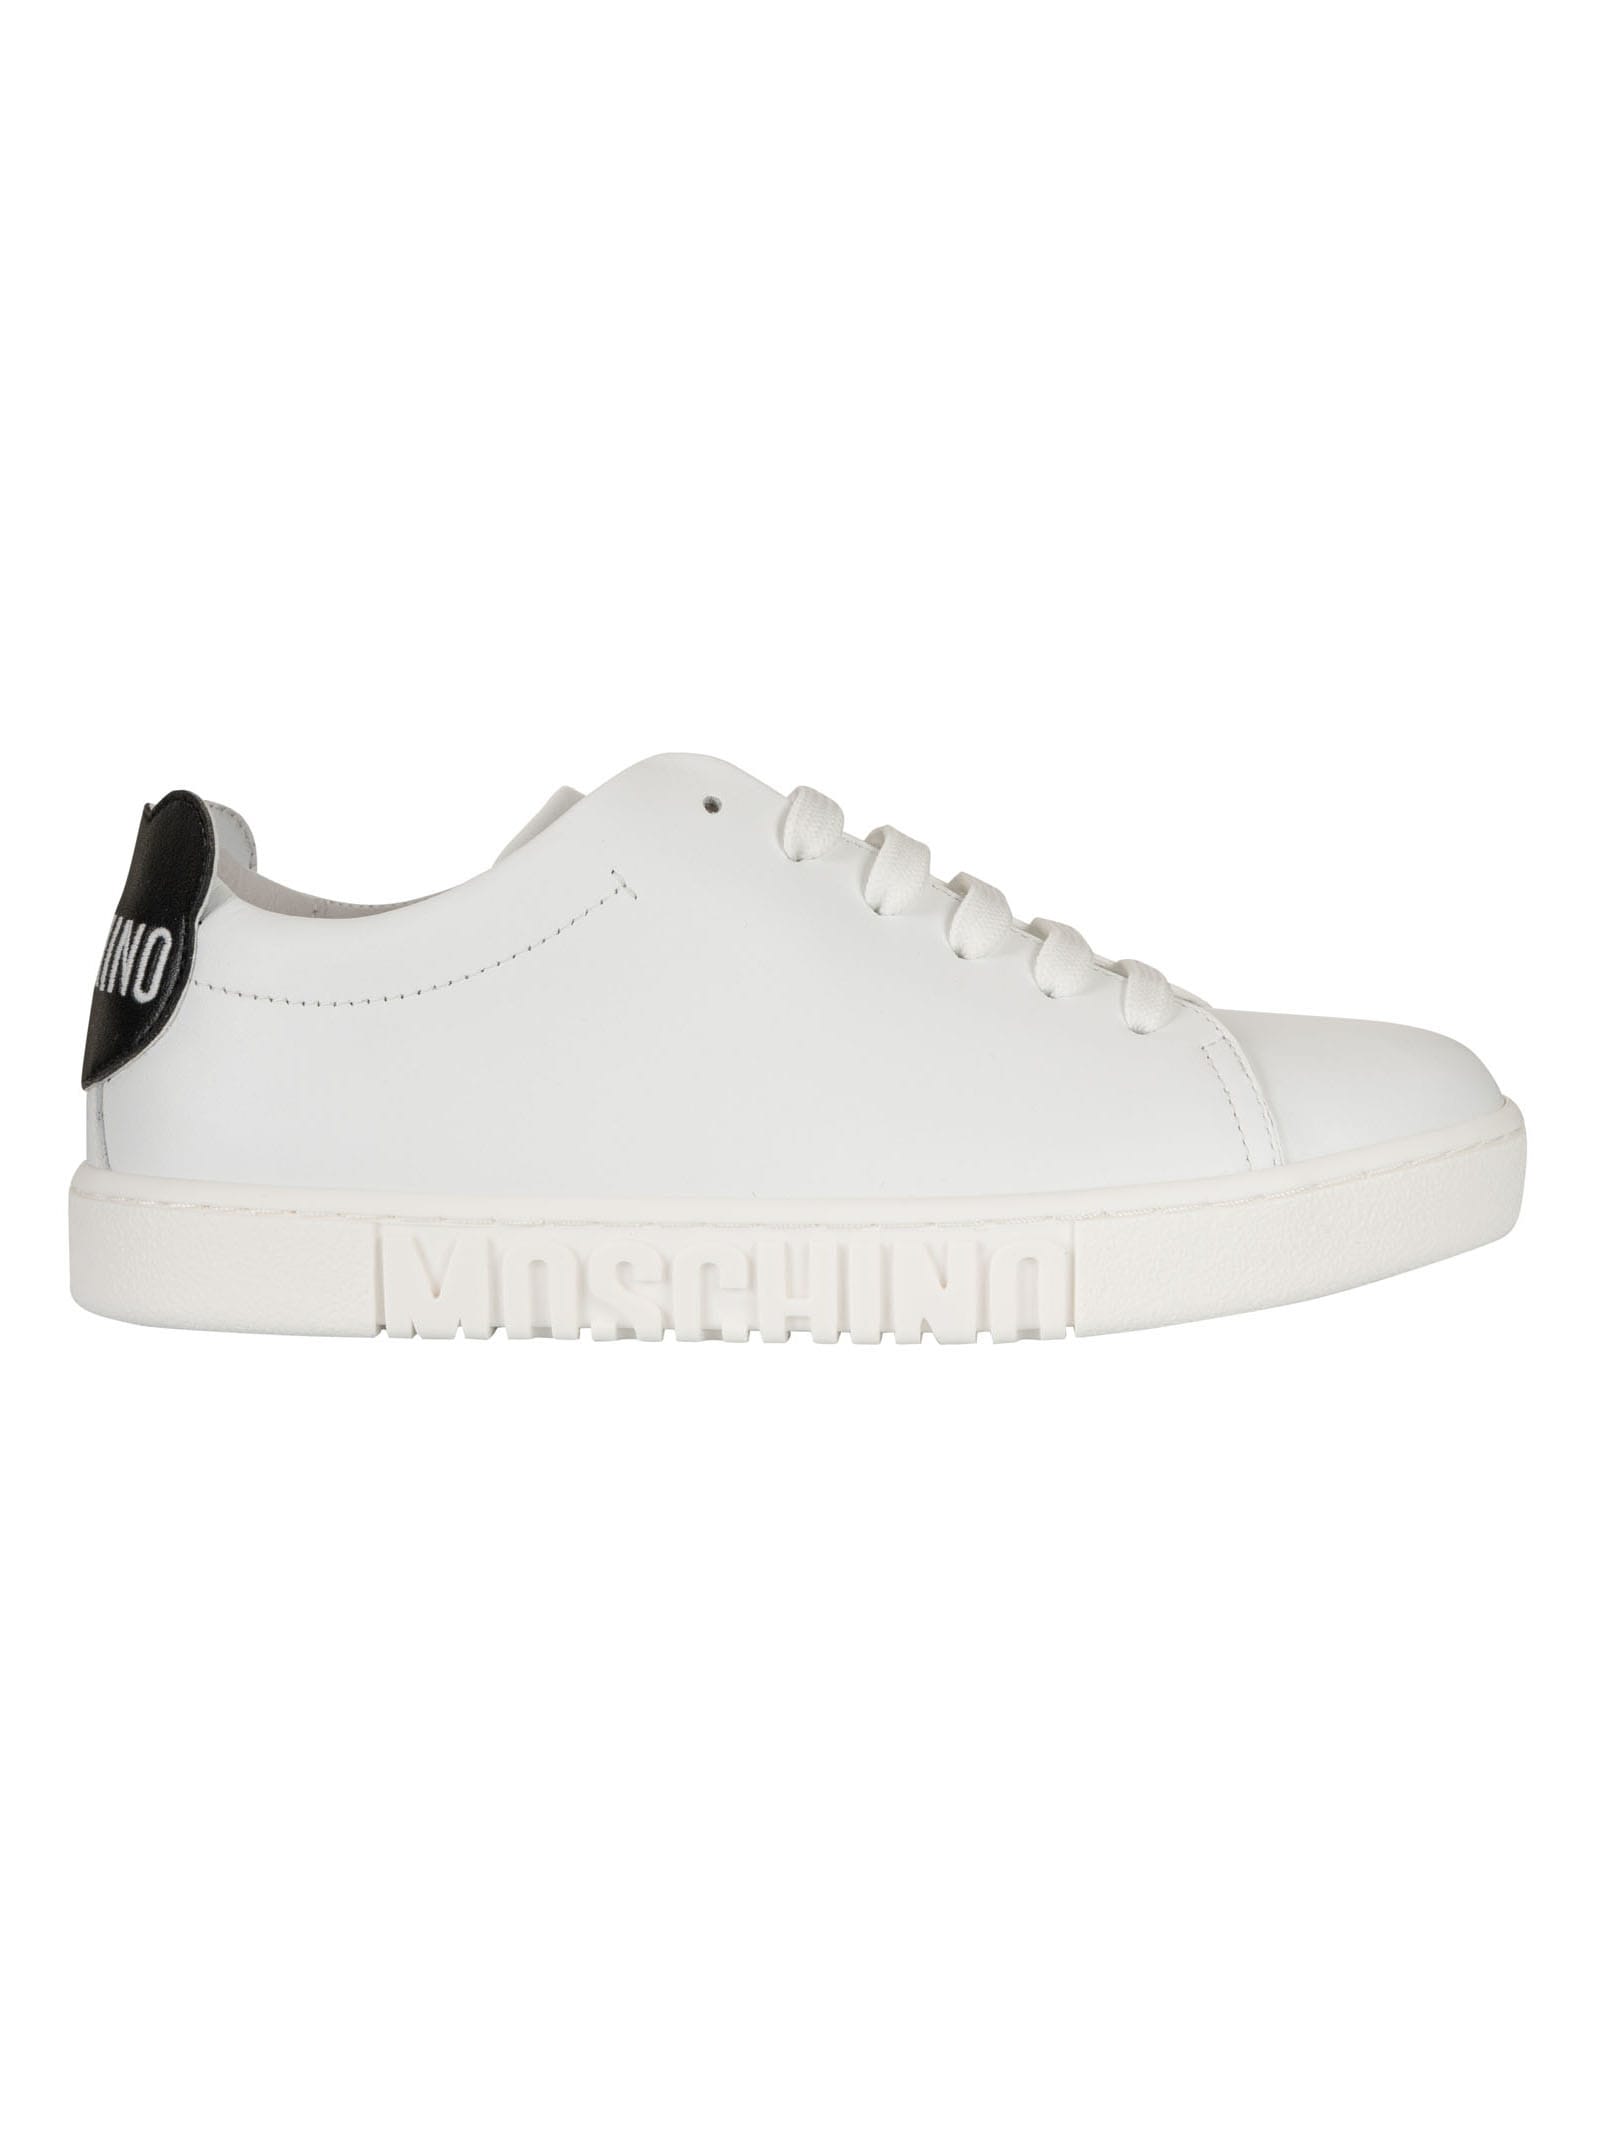 Buy Moschino Logo25 Sneakers online, shop Moschino shoes with free shipping